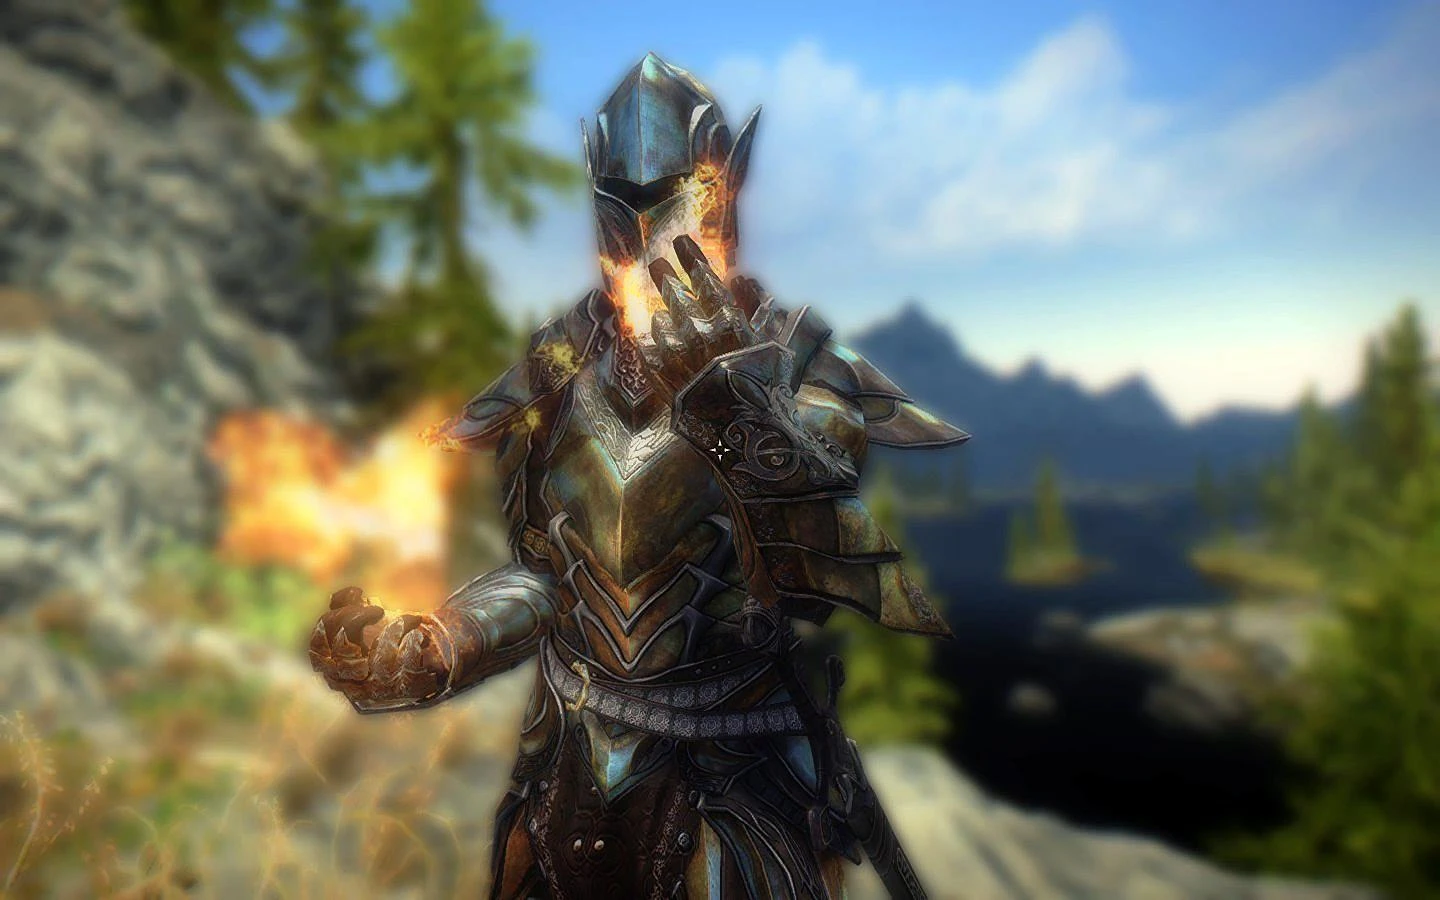 ebony armor by cabal preview at skyrim nexus mods and community.